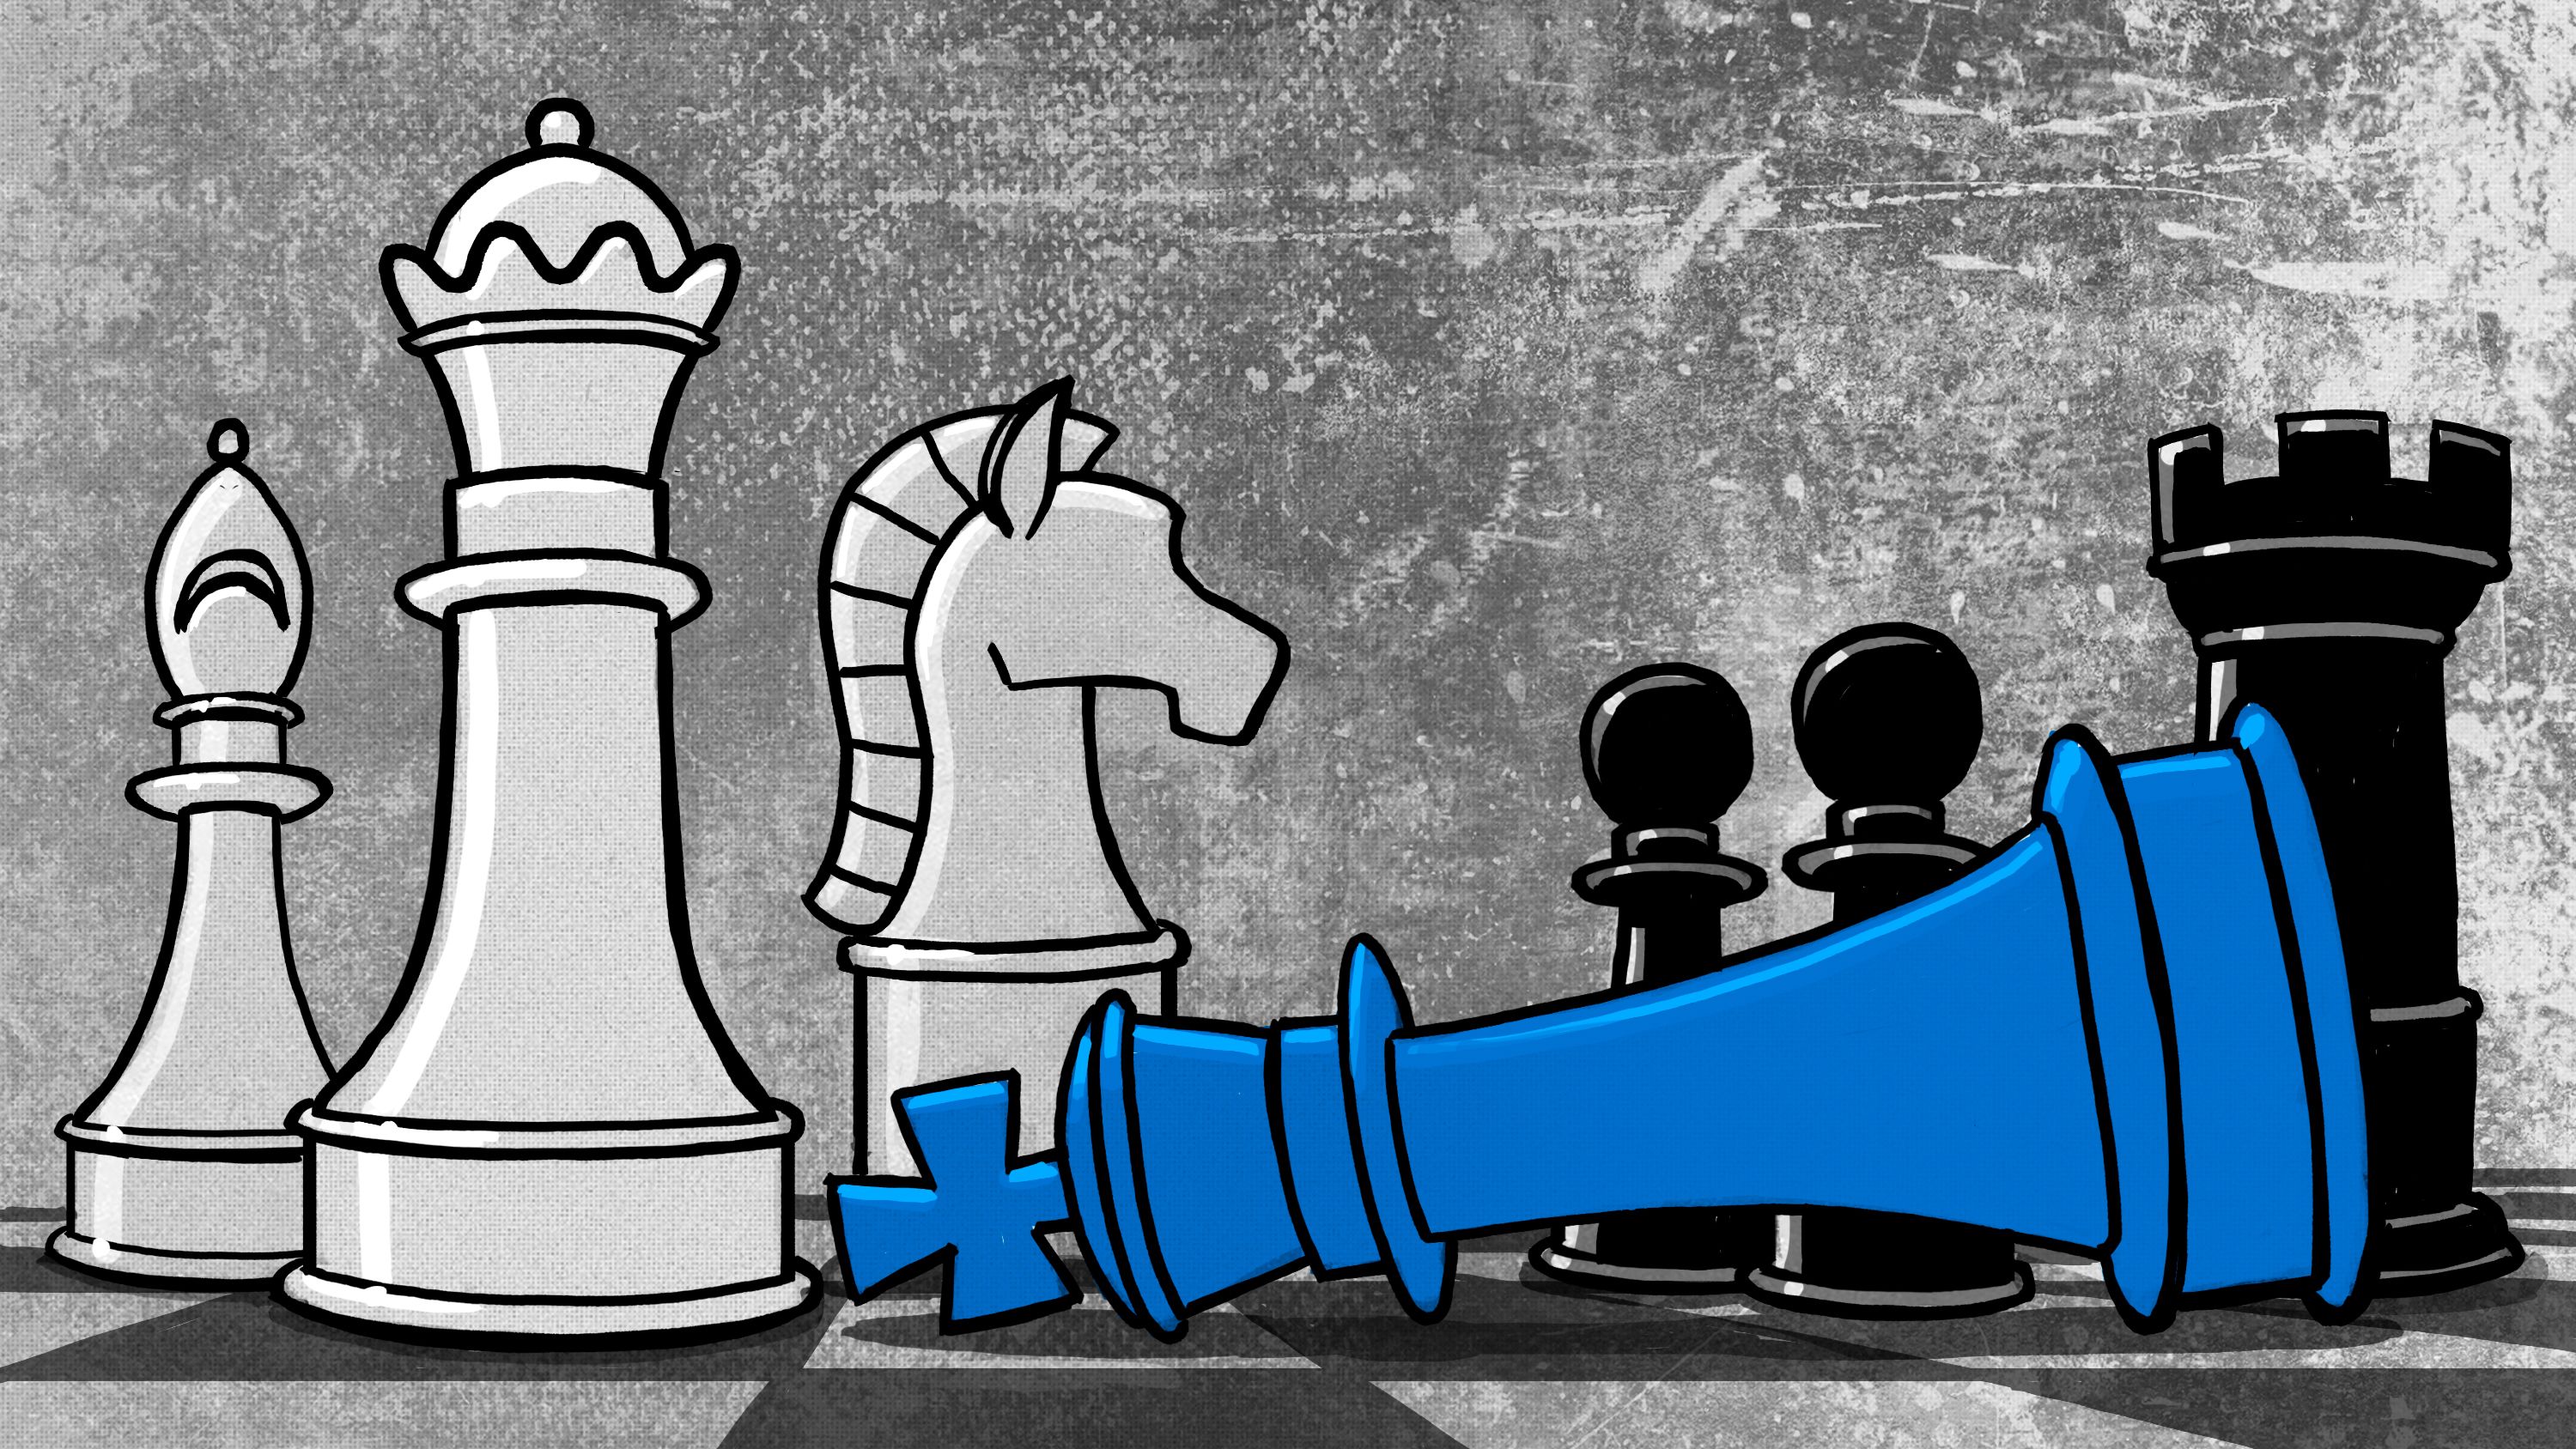 Should I Treat My Dating Life Like A Chess Game?